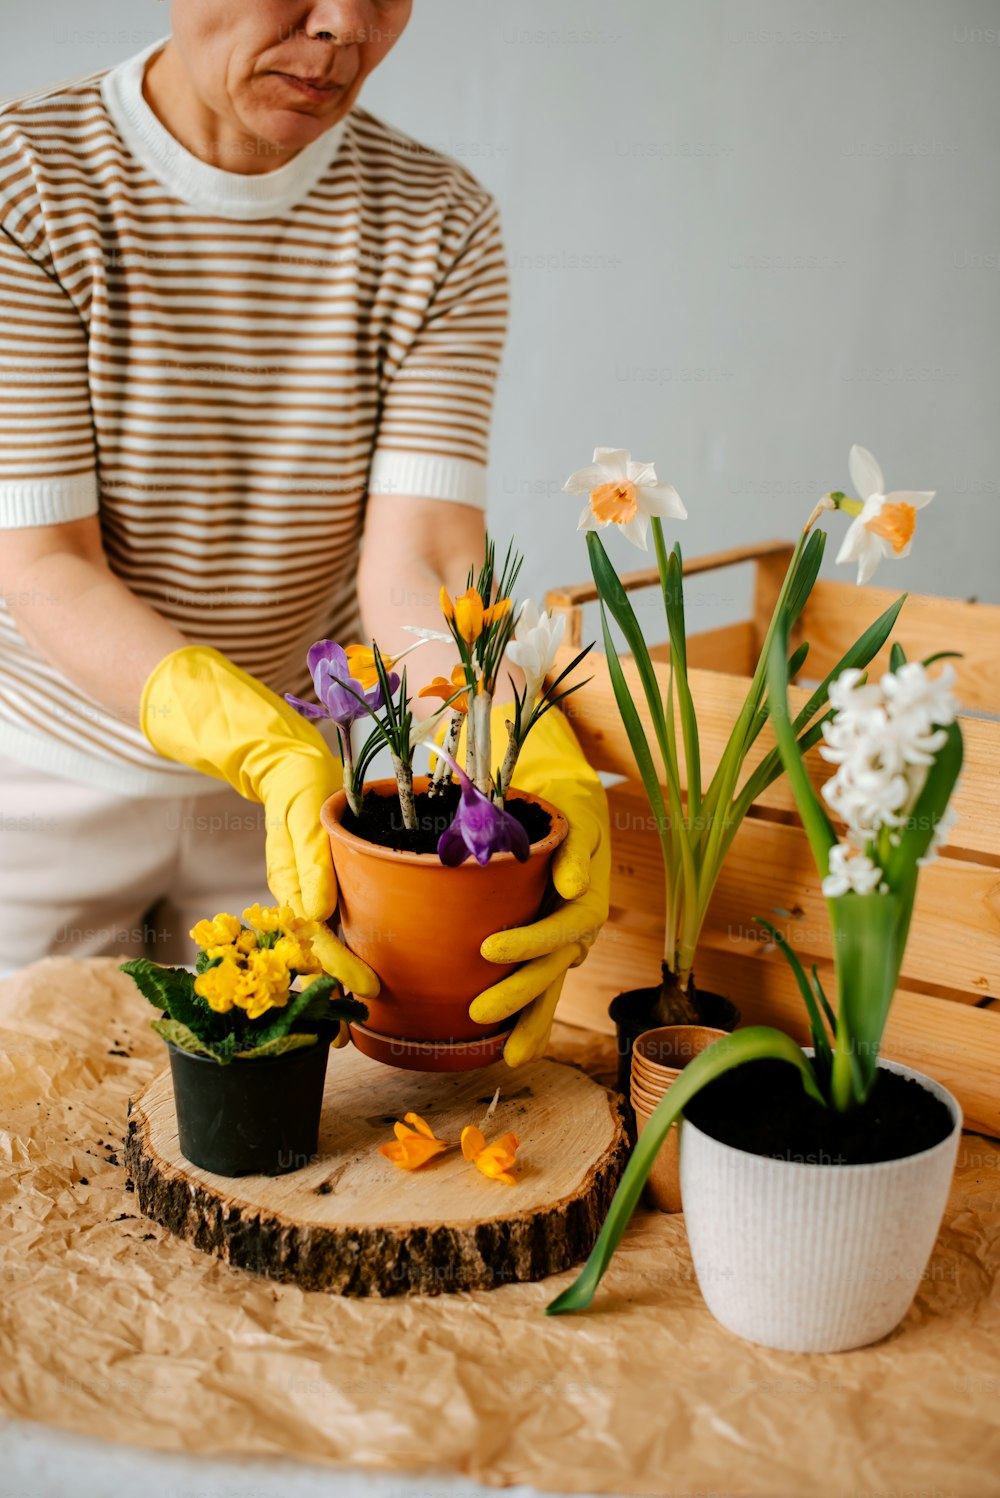 a man in a striped shirt and yellow gloves is arranging flowers